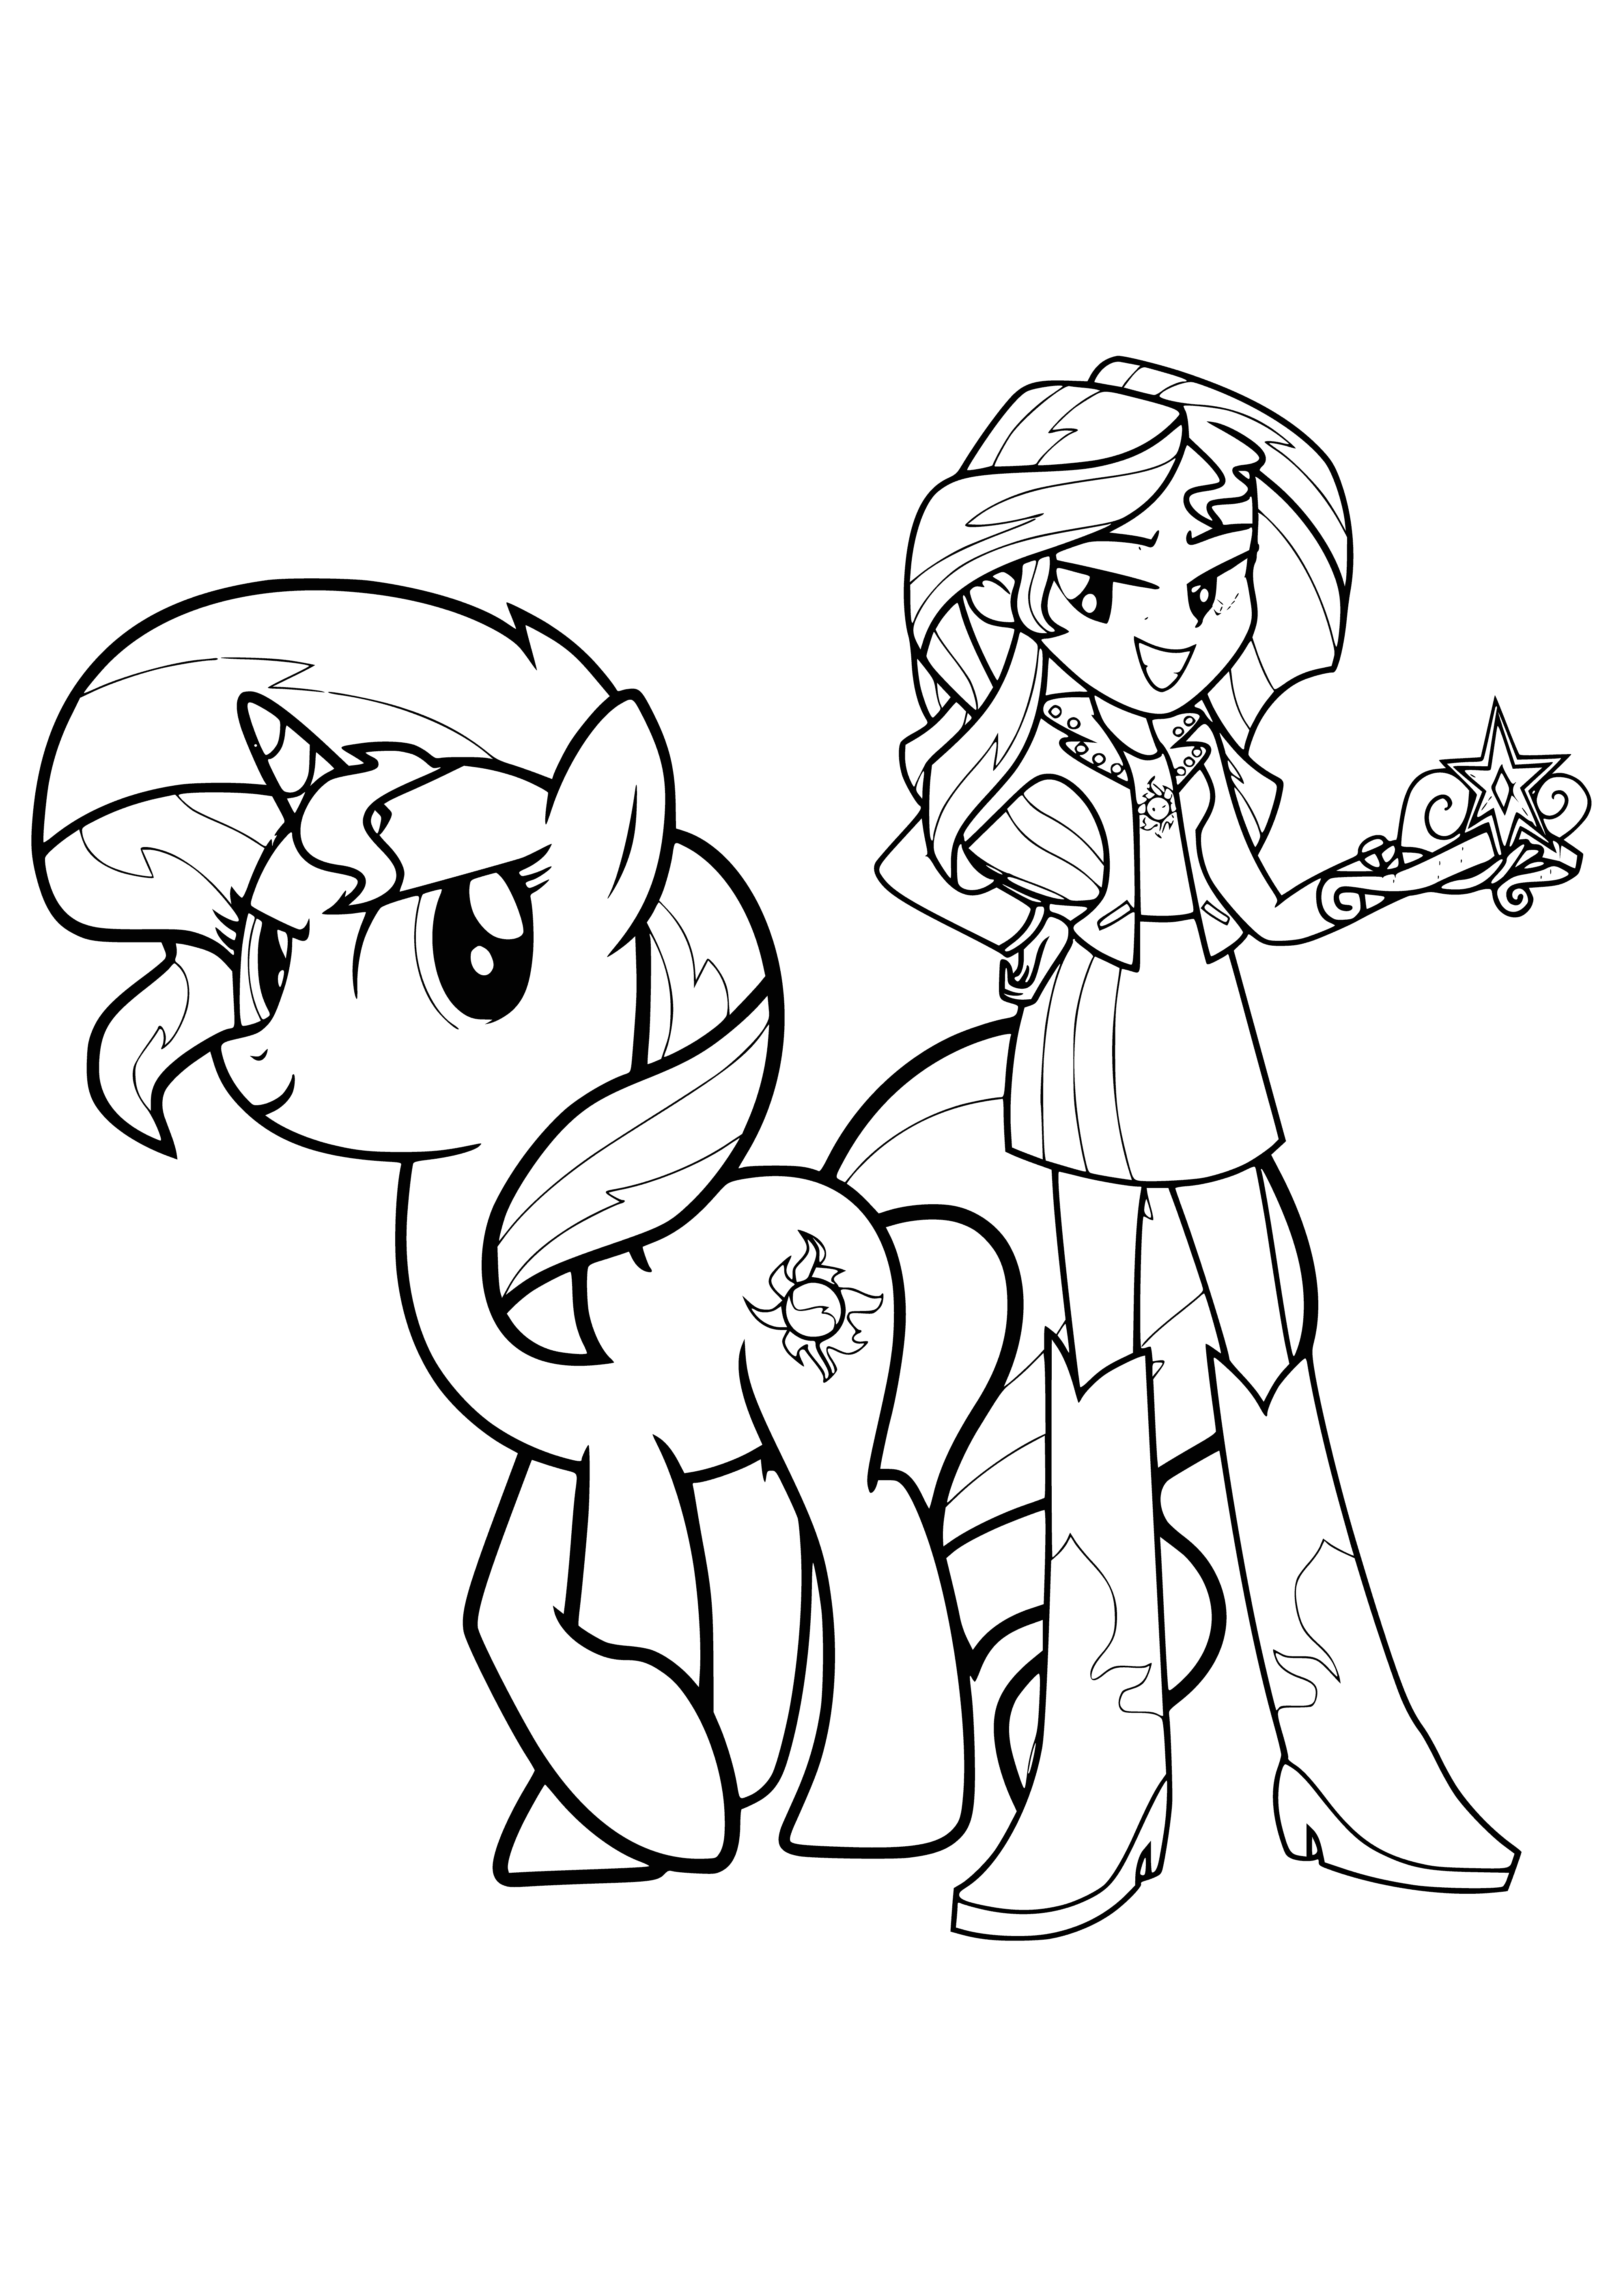 coloring page: Girl w/ long purple hair & wearing purple headband, dress & white undershirt is Sunset Shimmer. #MyLittlePony #Coloring